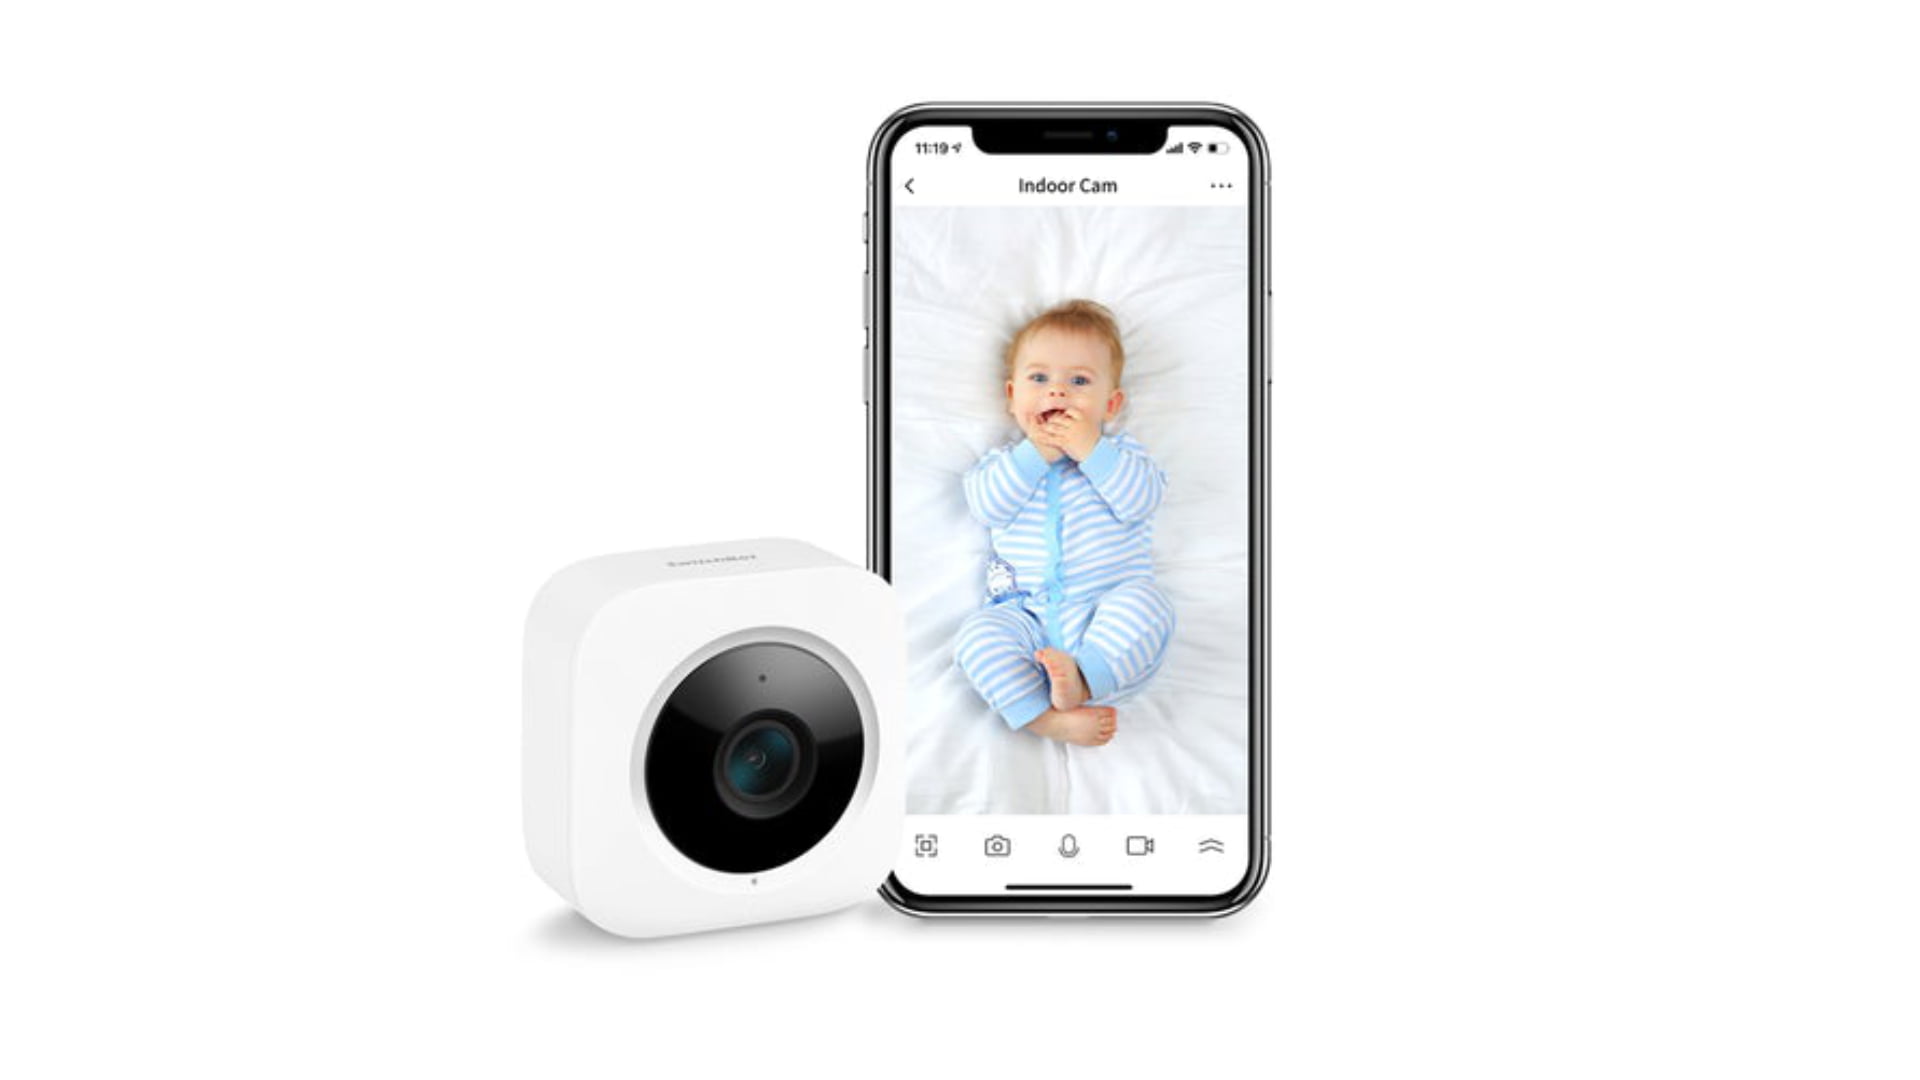 SwitchBot Indoor Cam review: How good is the affordable Wi-Fi camera?